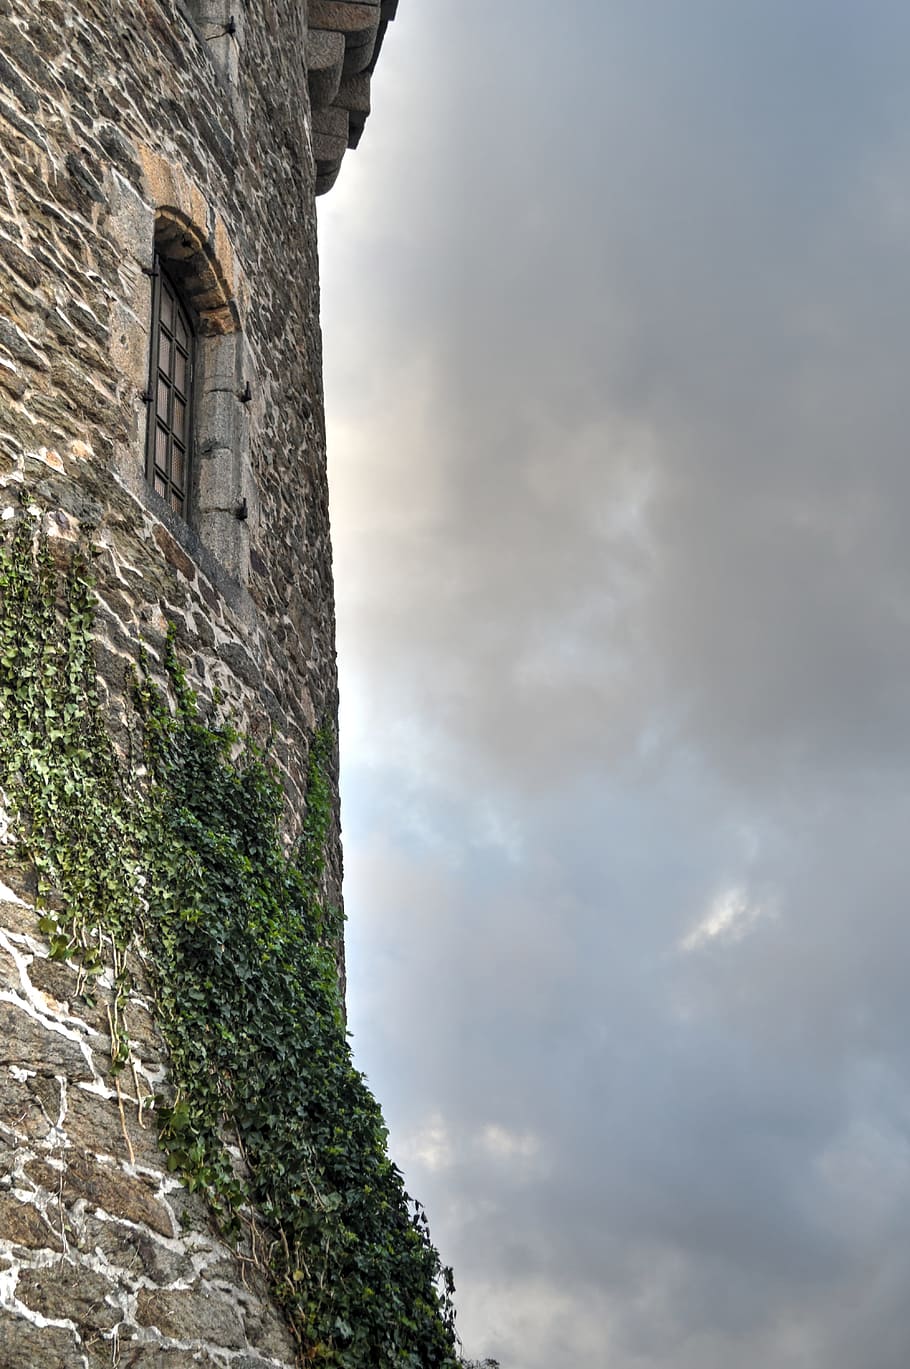 Tower, Old Stone, Heritage, old tower, rustic, english ivy, old building, finistère, brittany, france